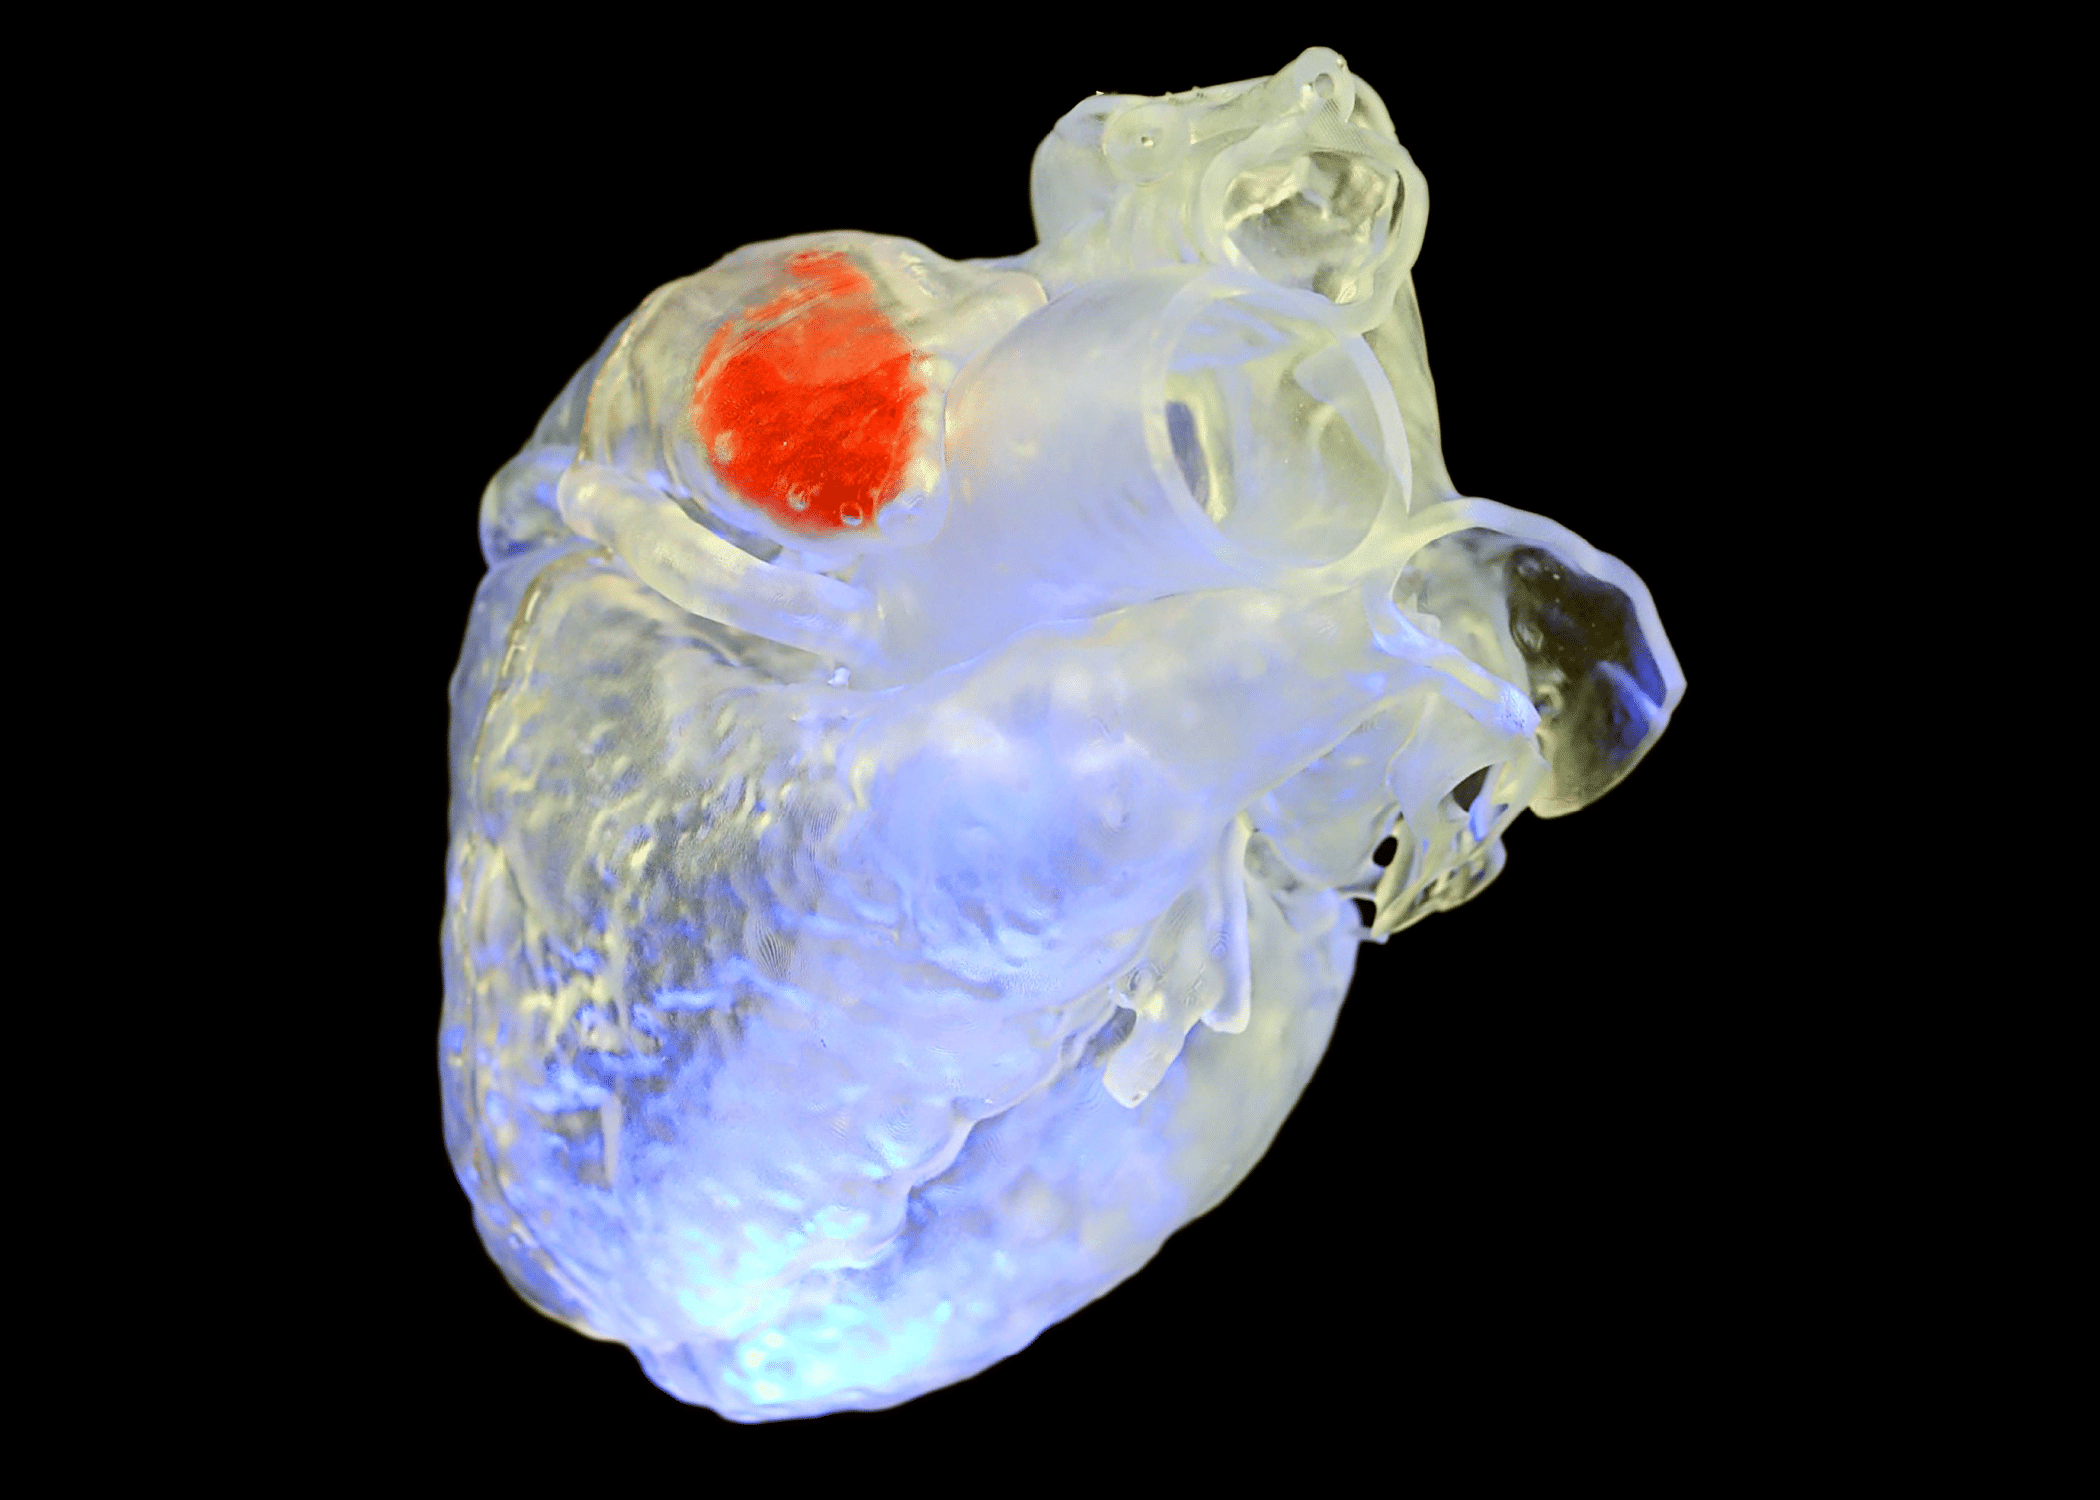 A clear heart shows the red sonoink in